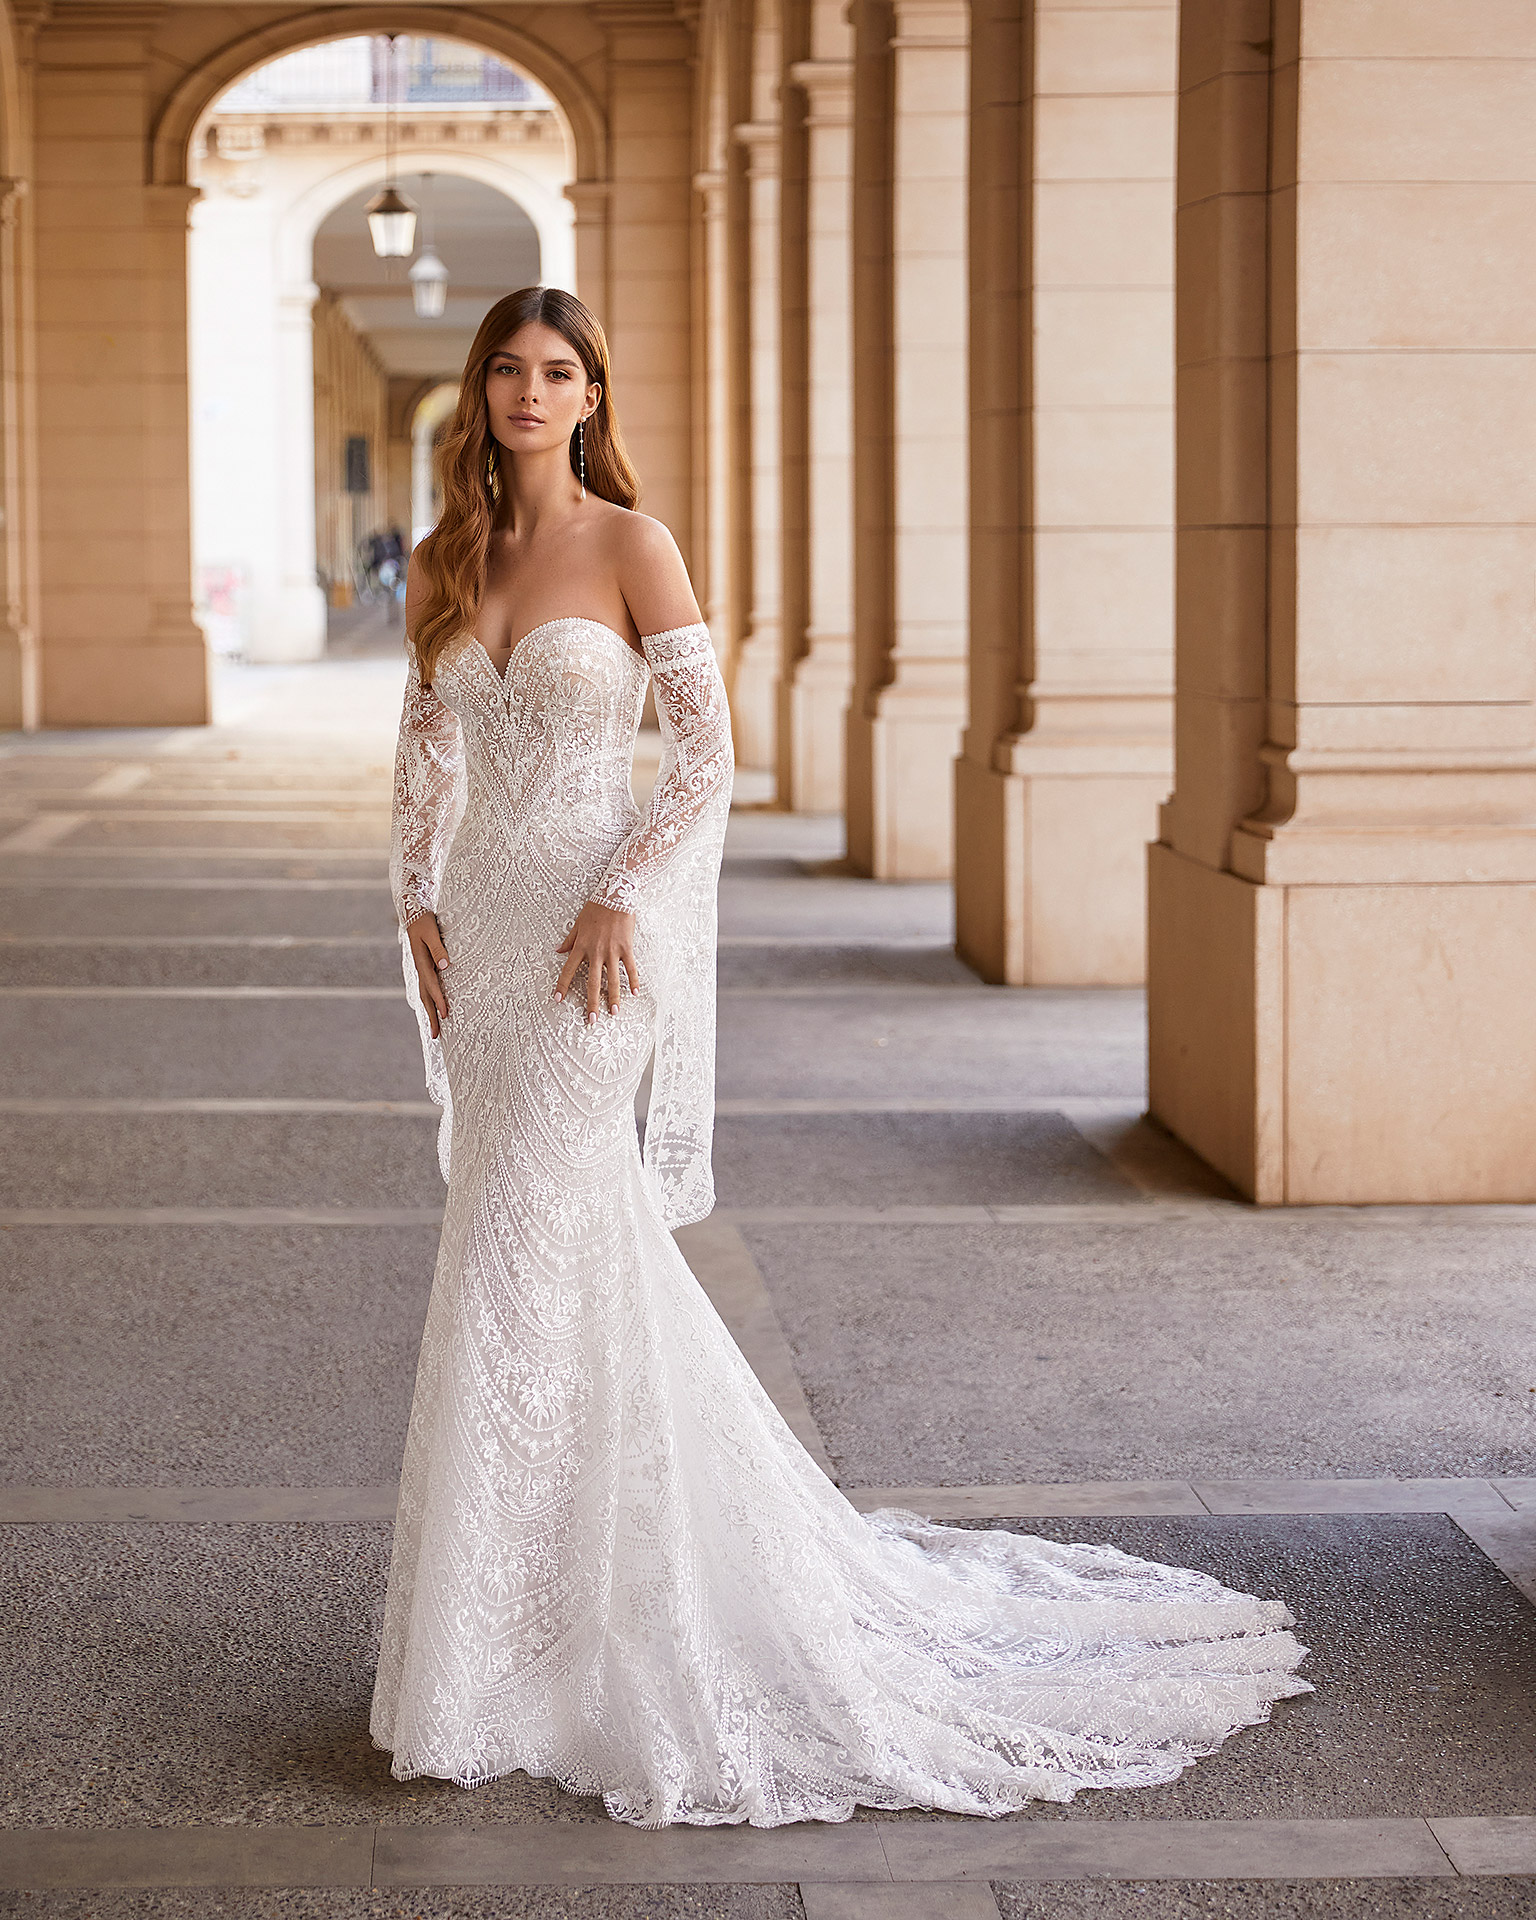 Romantic mermaid-style lace wedding dress, featuring flowing lace sleeves; with a push-up corset structure, a button-up back, and flowing sleeves. Exclusive Luna Novias outfit made of lace. LUNA_NOVIAS.